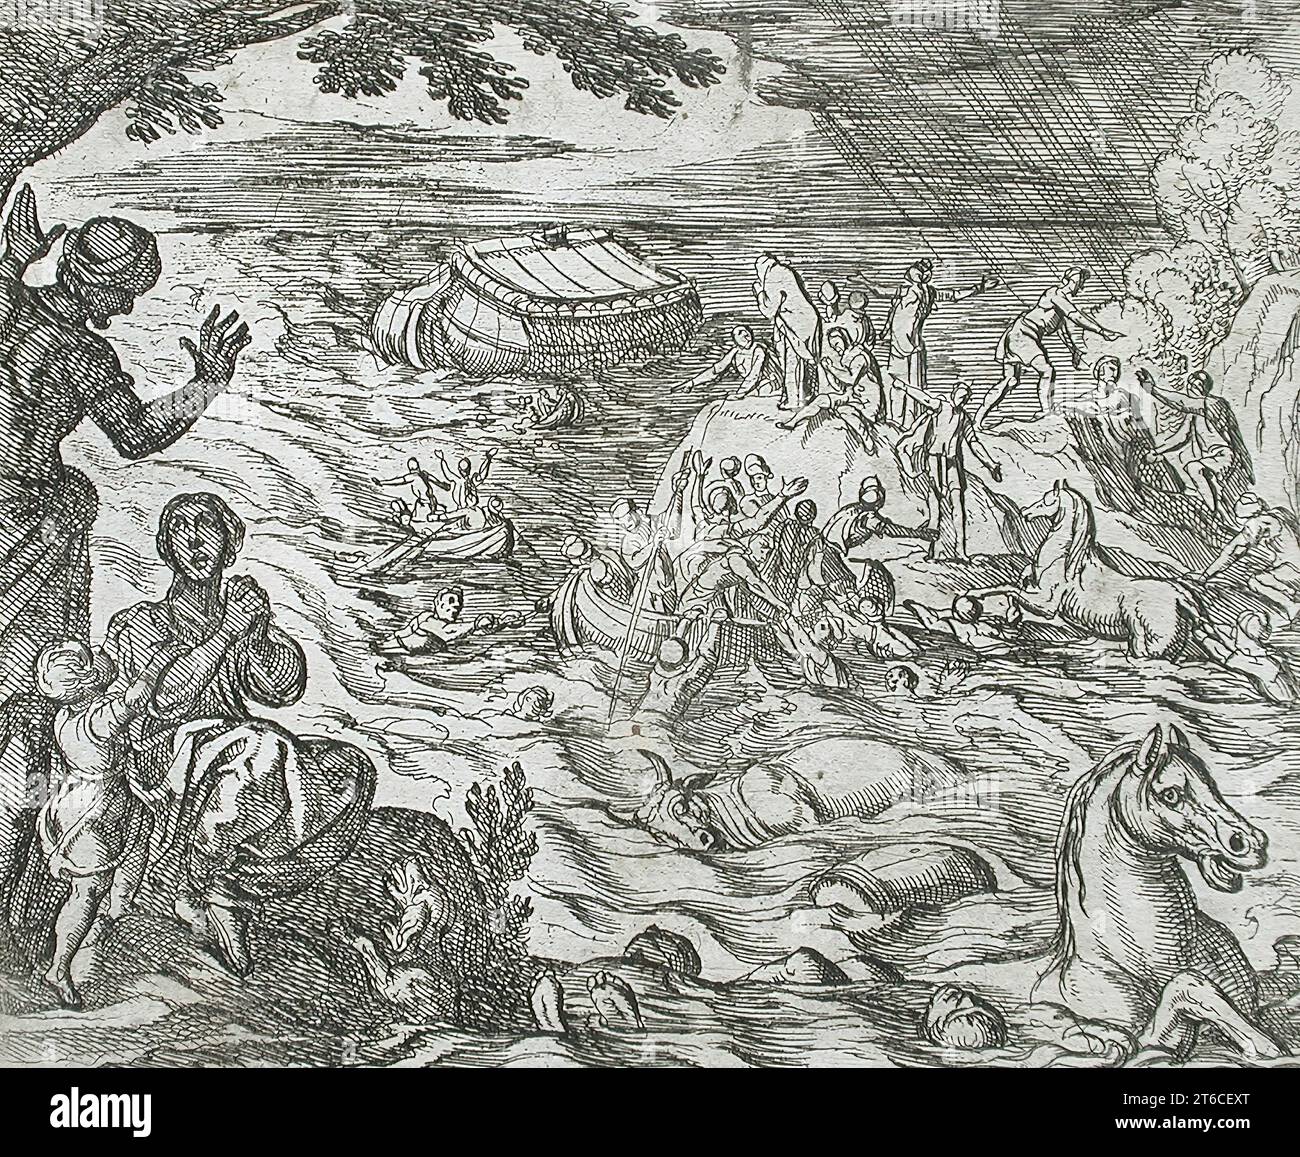 The Flood, published 1606. From The Metamorphoses of Ovid, pl. 7. Stock Photo